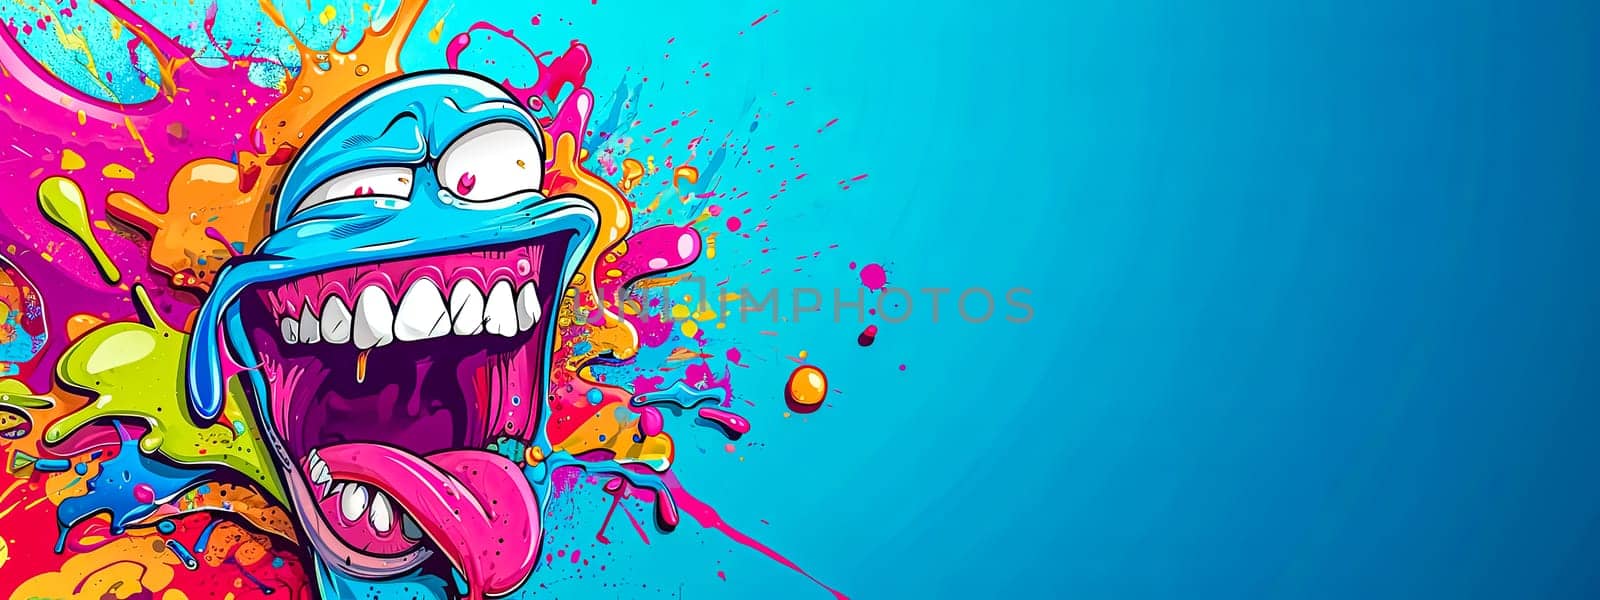 A vibrant character bursting with energy, featuring a wide-eyed expression and a large, open mouth amidst a dynamic splash of colorful paint against a bright blue background. by Edophoto